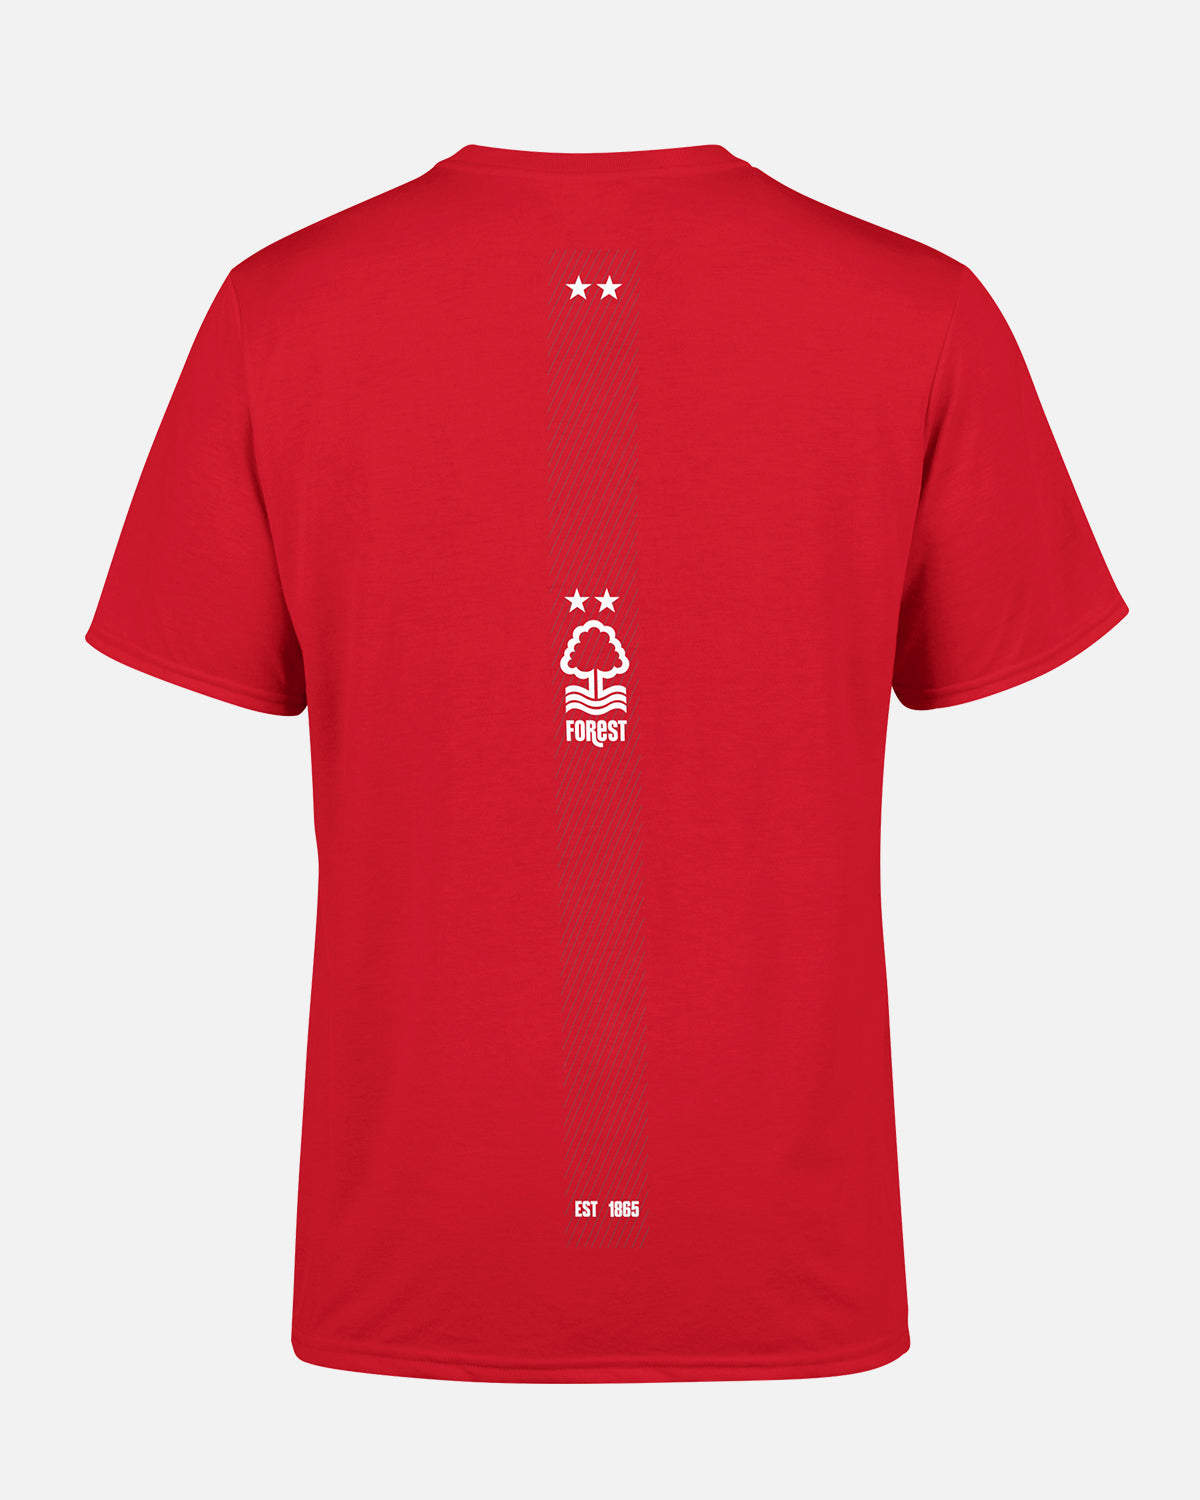 NFFC Red Vertical T-Shirt